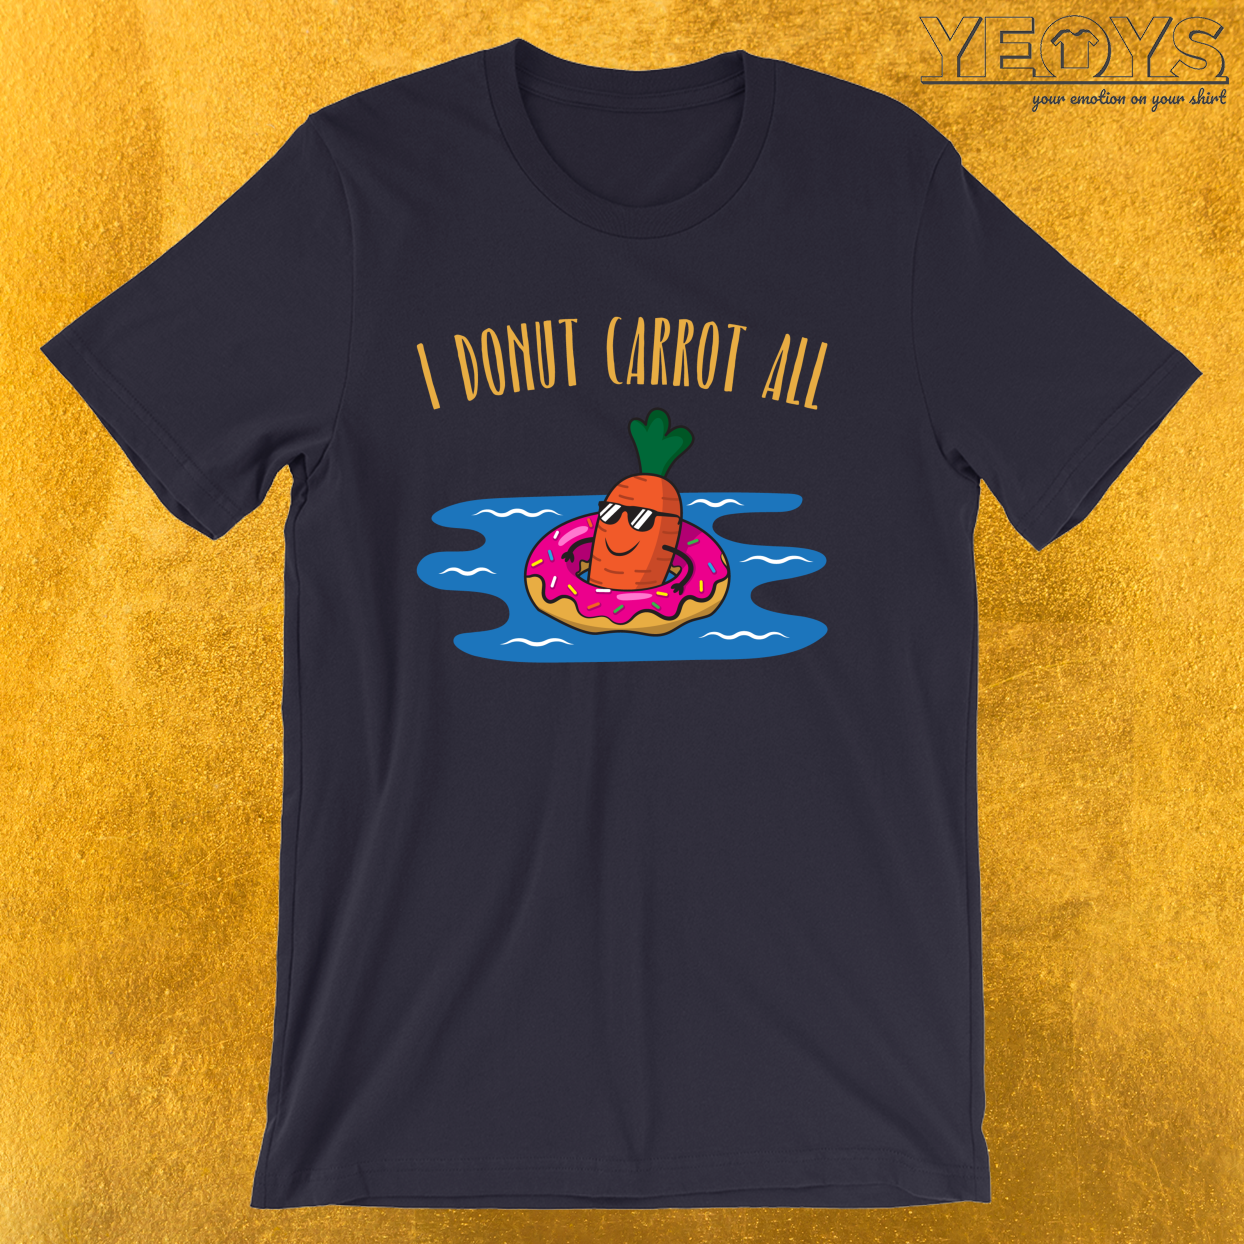 I Donut Carrot All – Funny Food Puns Tee